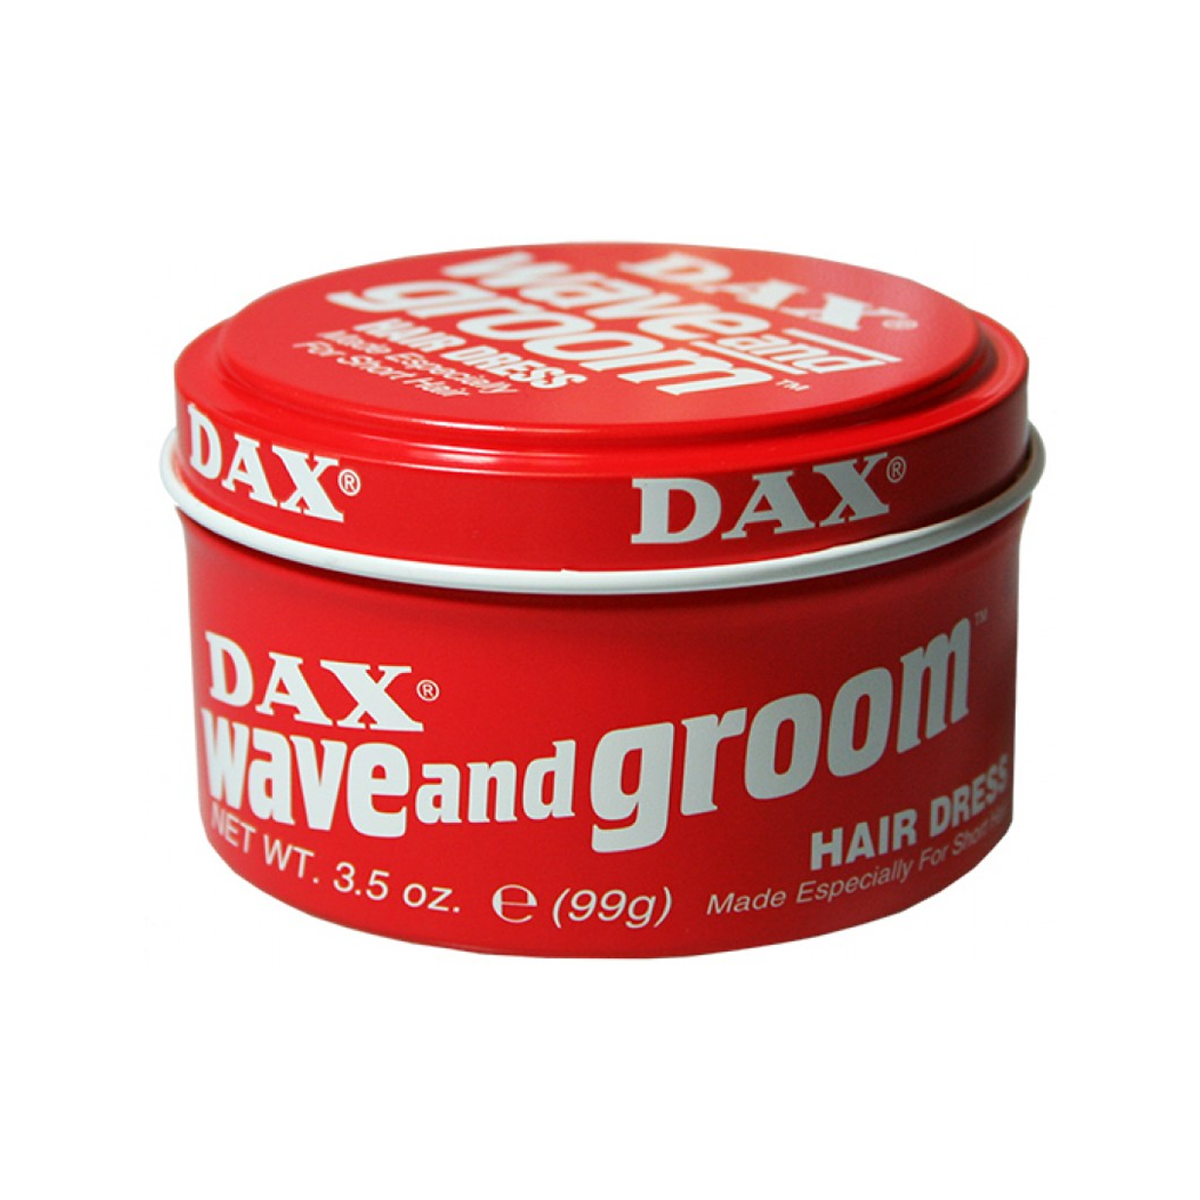 investering klistermærke repertoire Dax Wax Red Wave and Groom 99g - Shampoo Plus